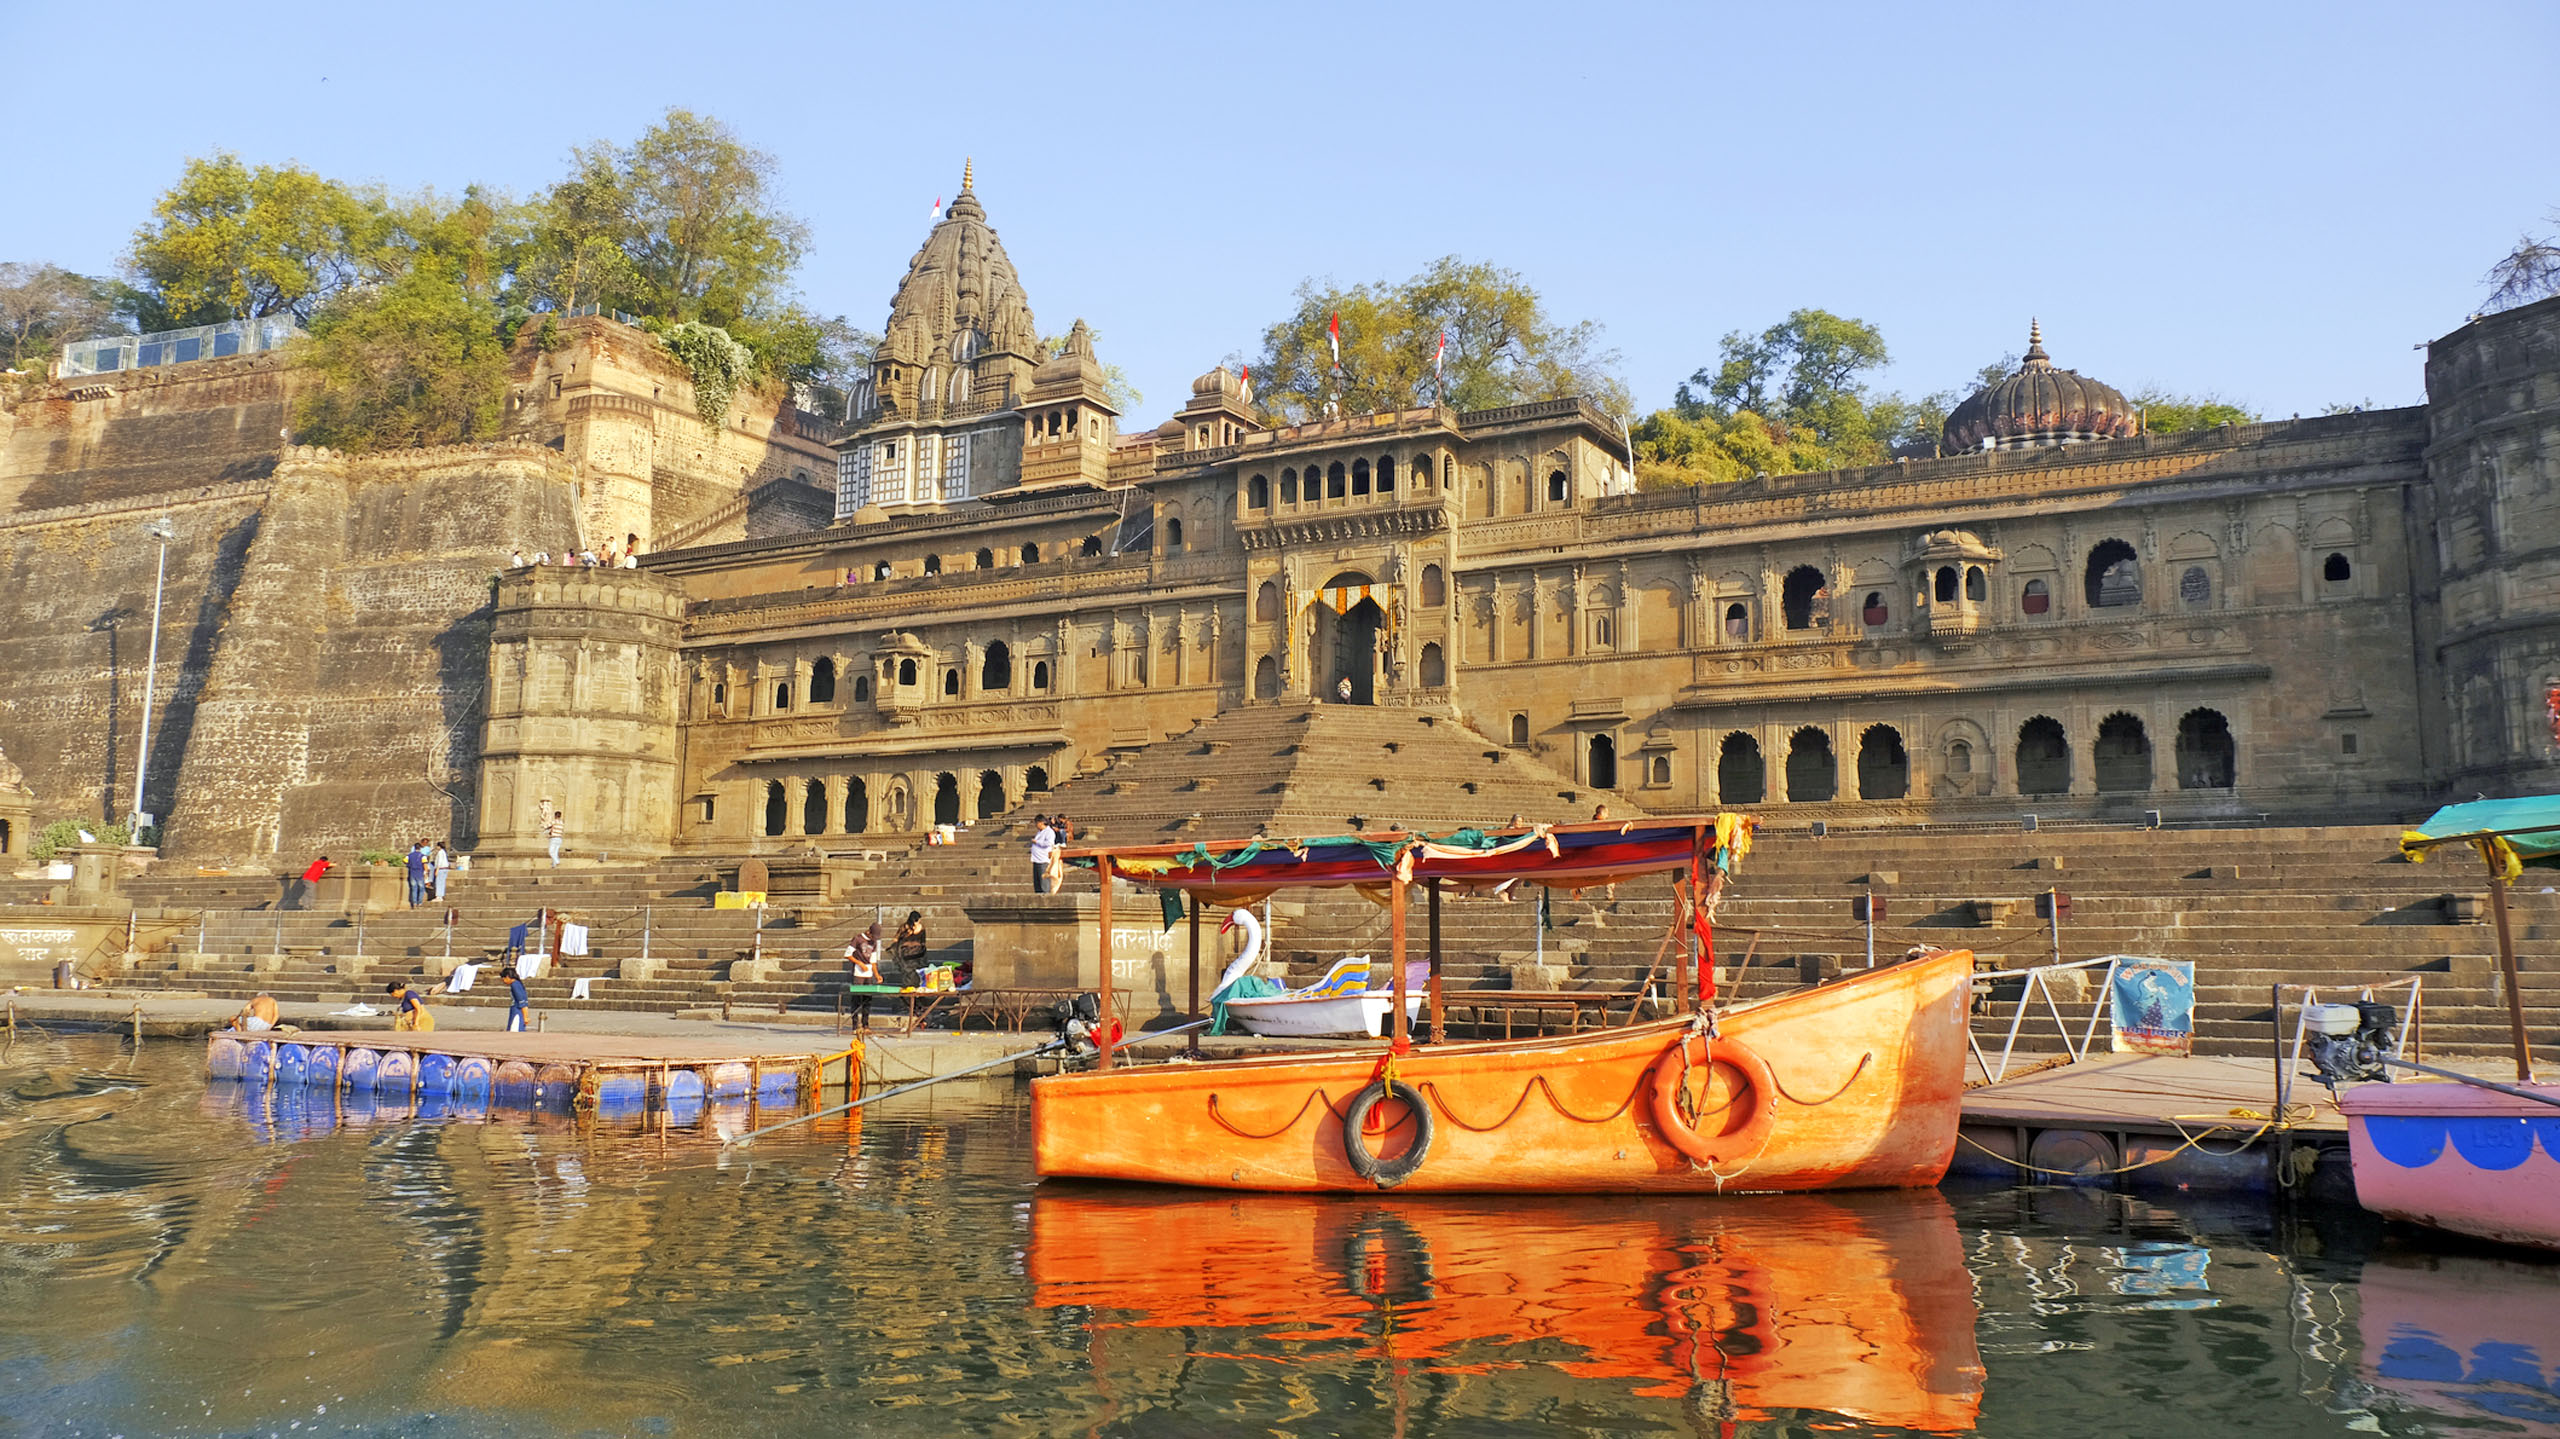 Ahilya fort in Maheshwar from the river